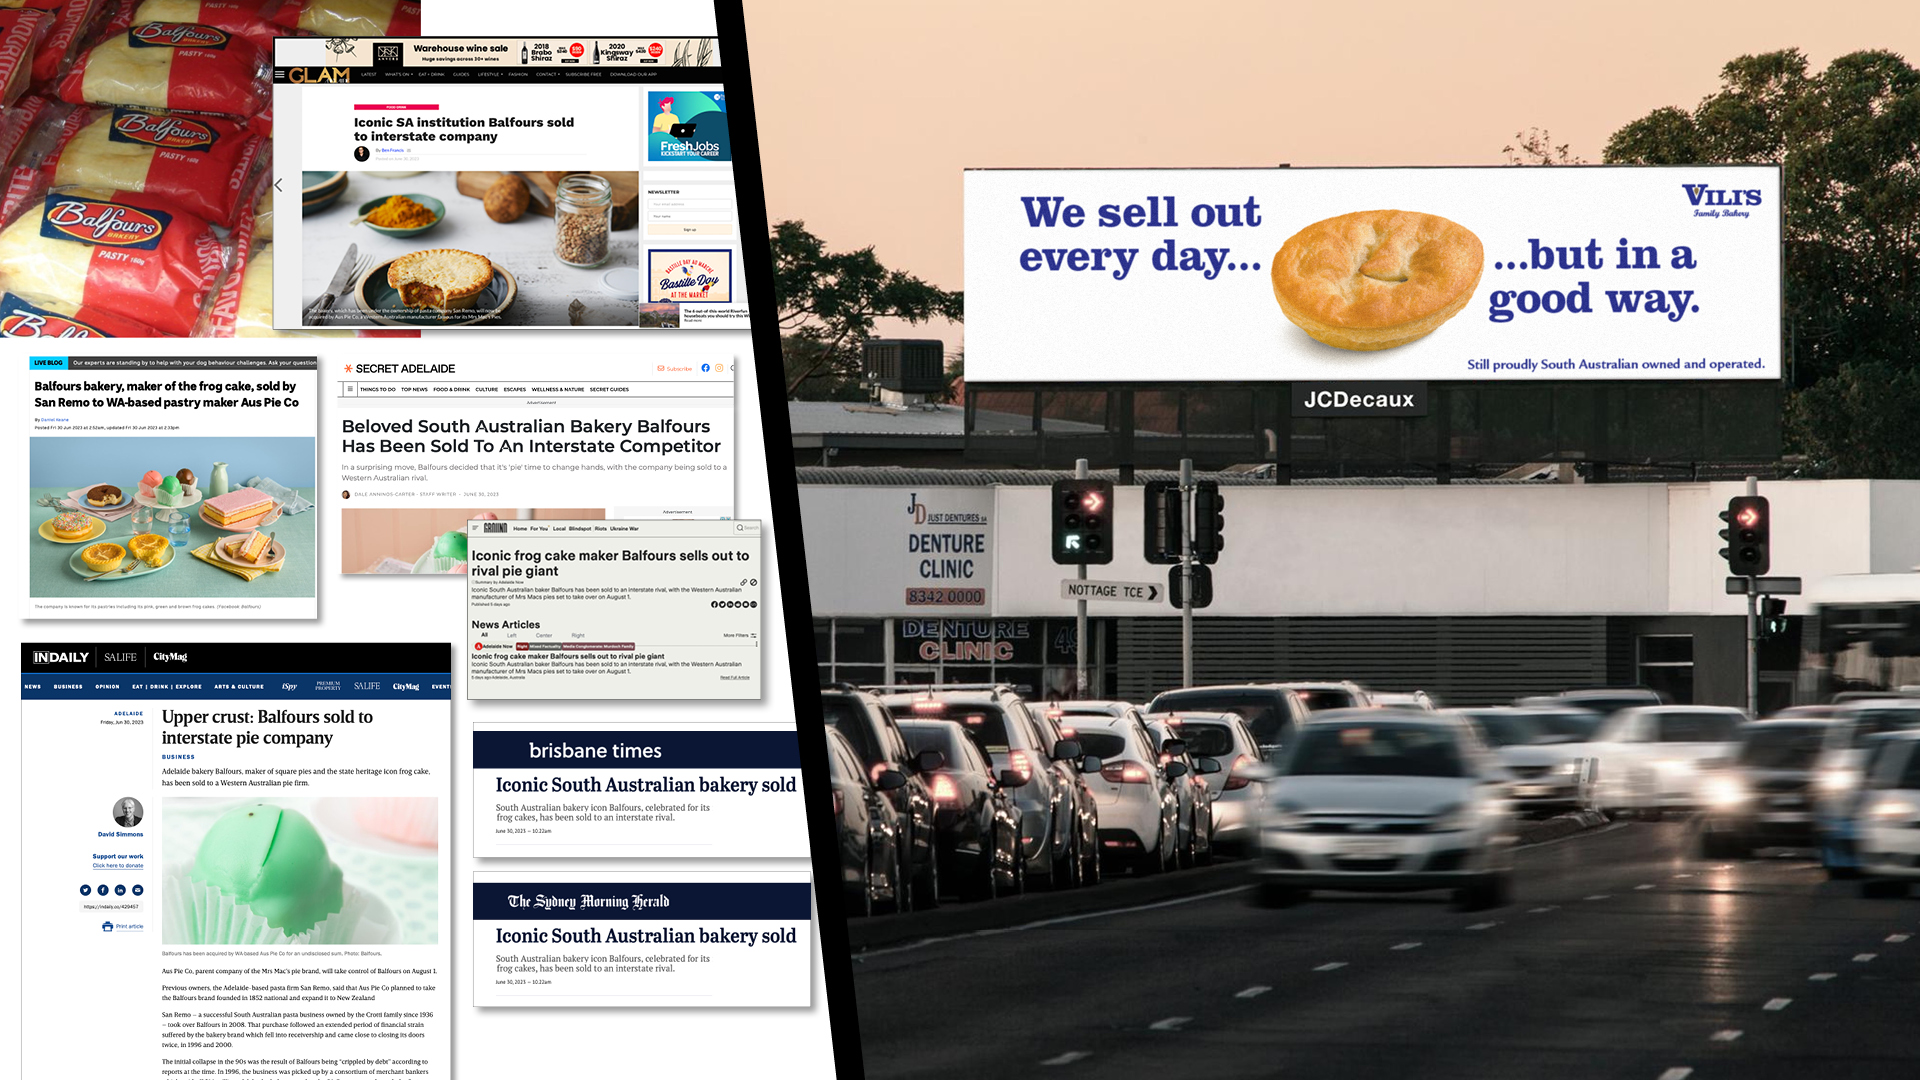 Vili's billboard ad and various press releases from Secret Adelaide, InDaily and The Sydney Morning Herald